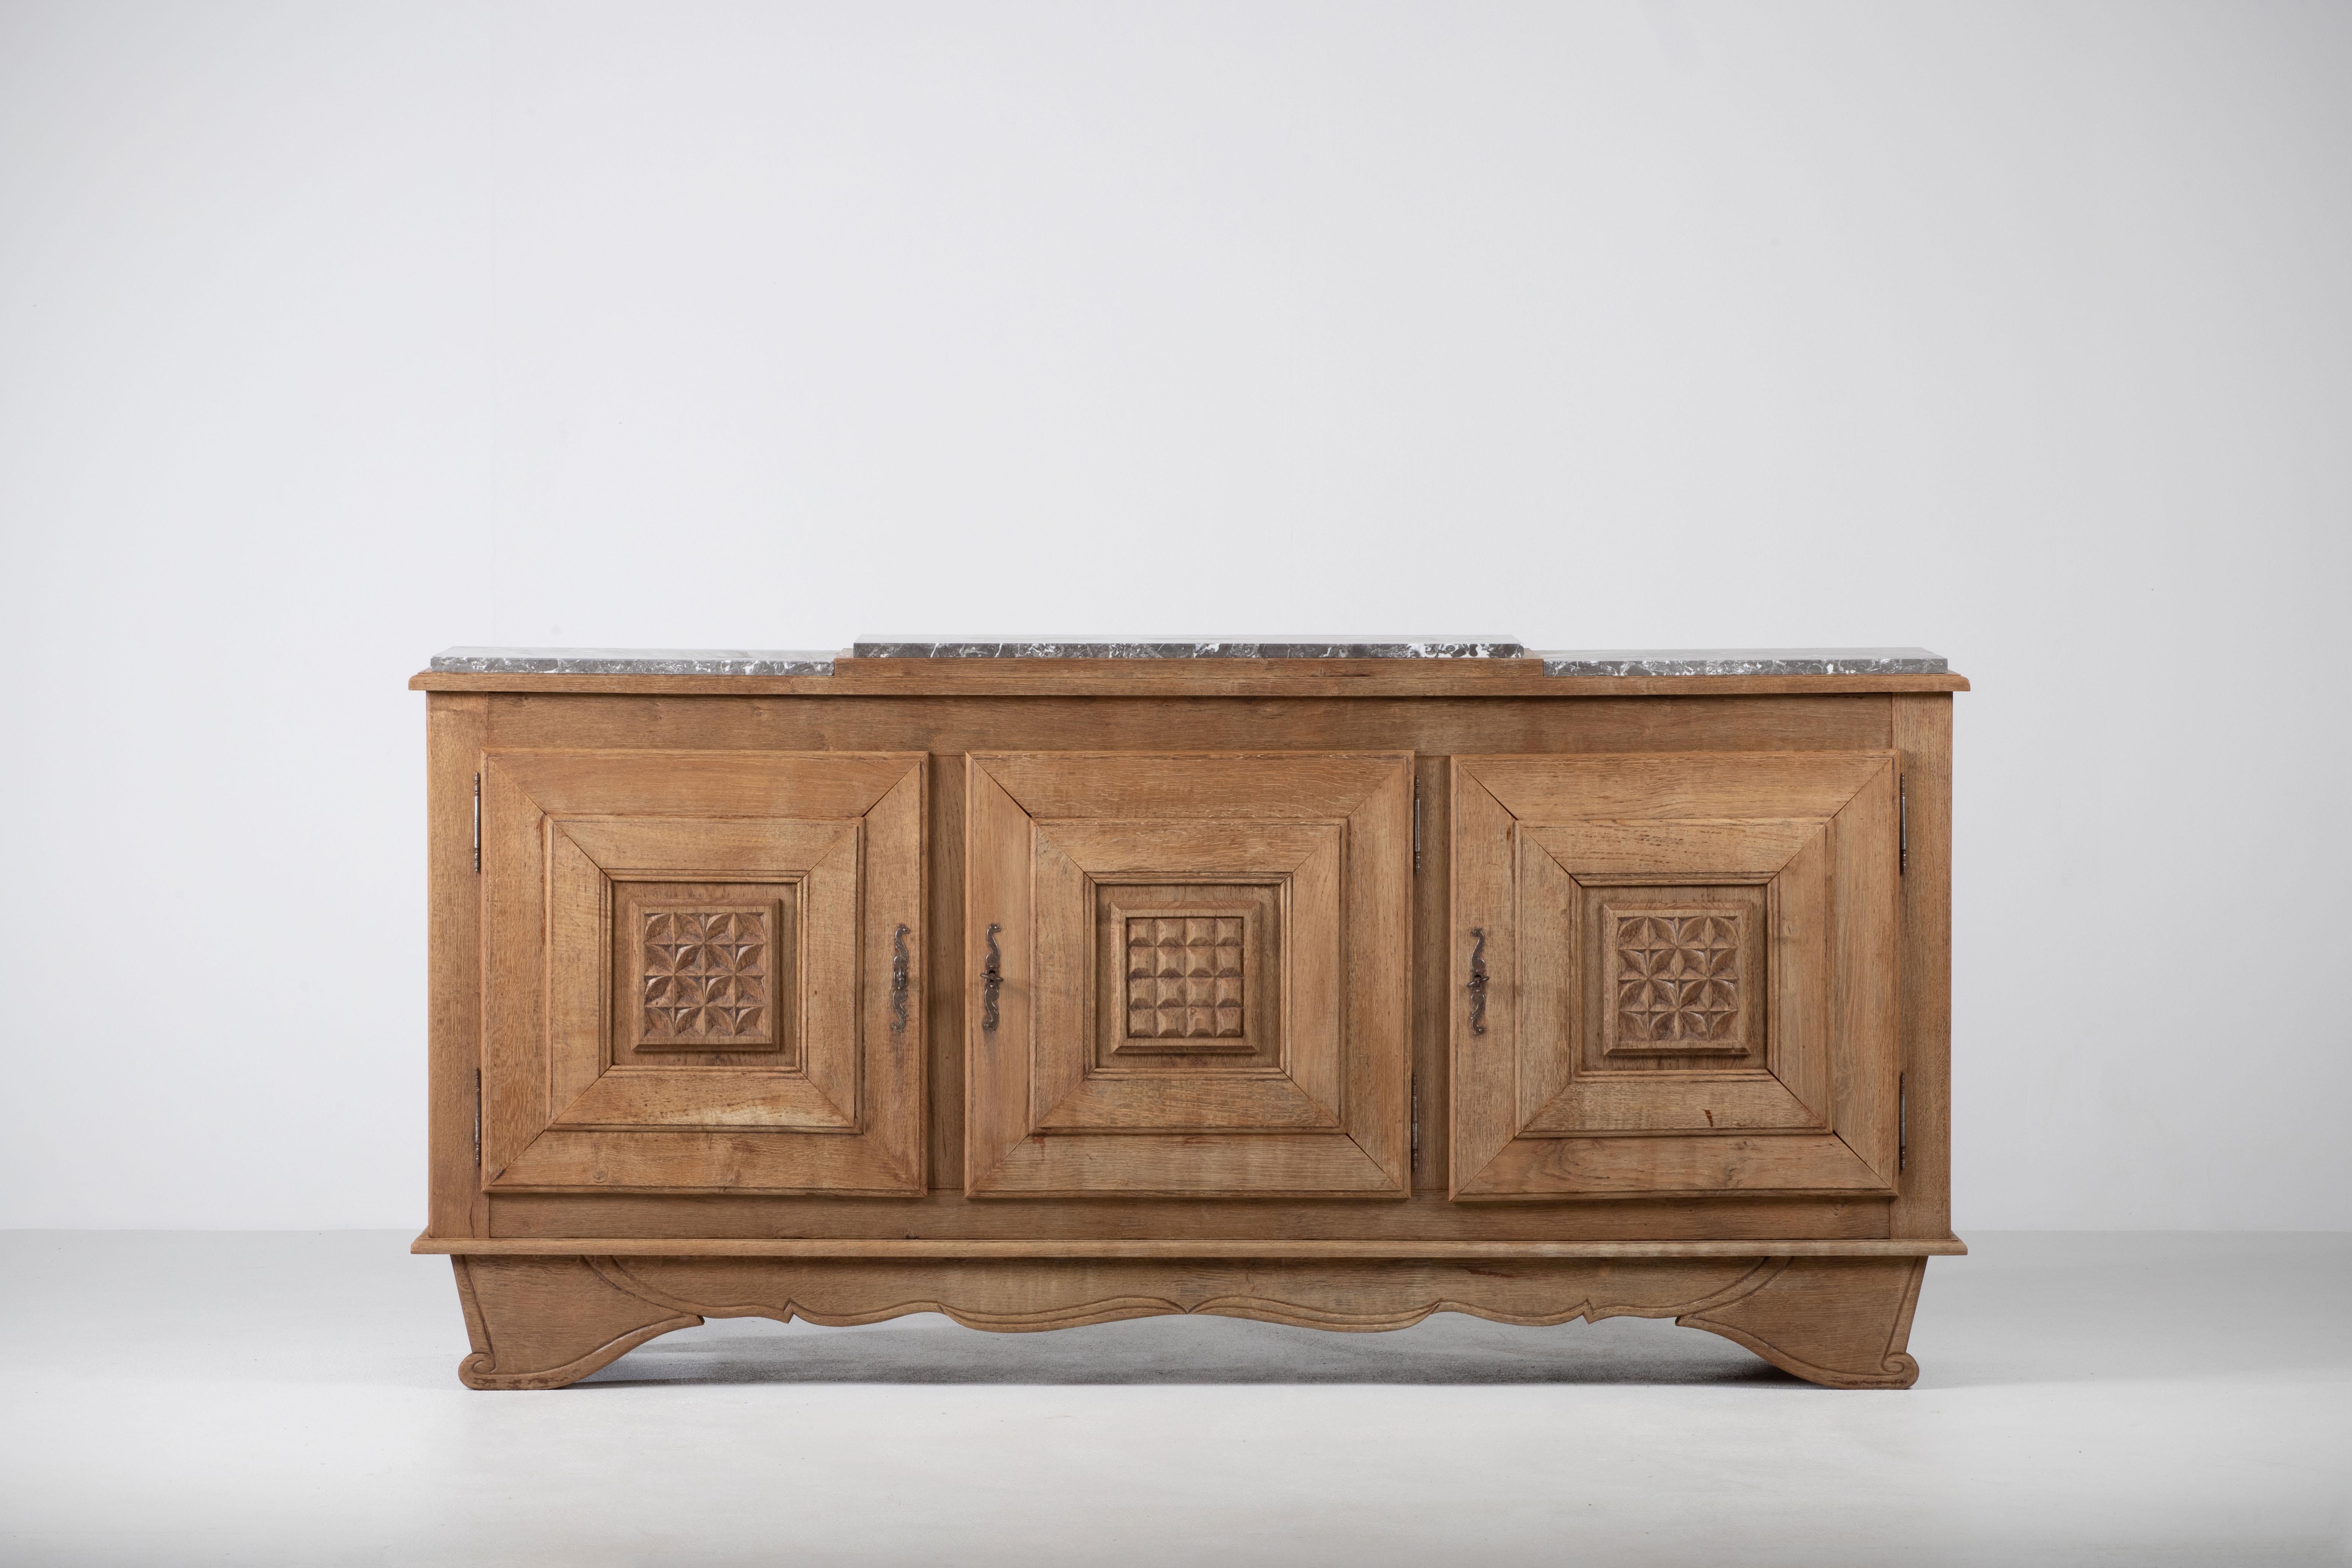 French Art Deco Solid Oak Credenza, France, 1940s For Sale